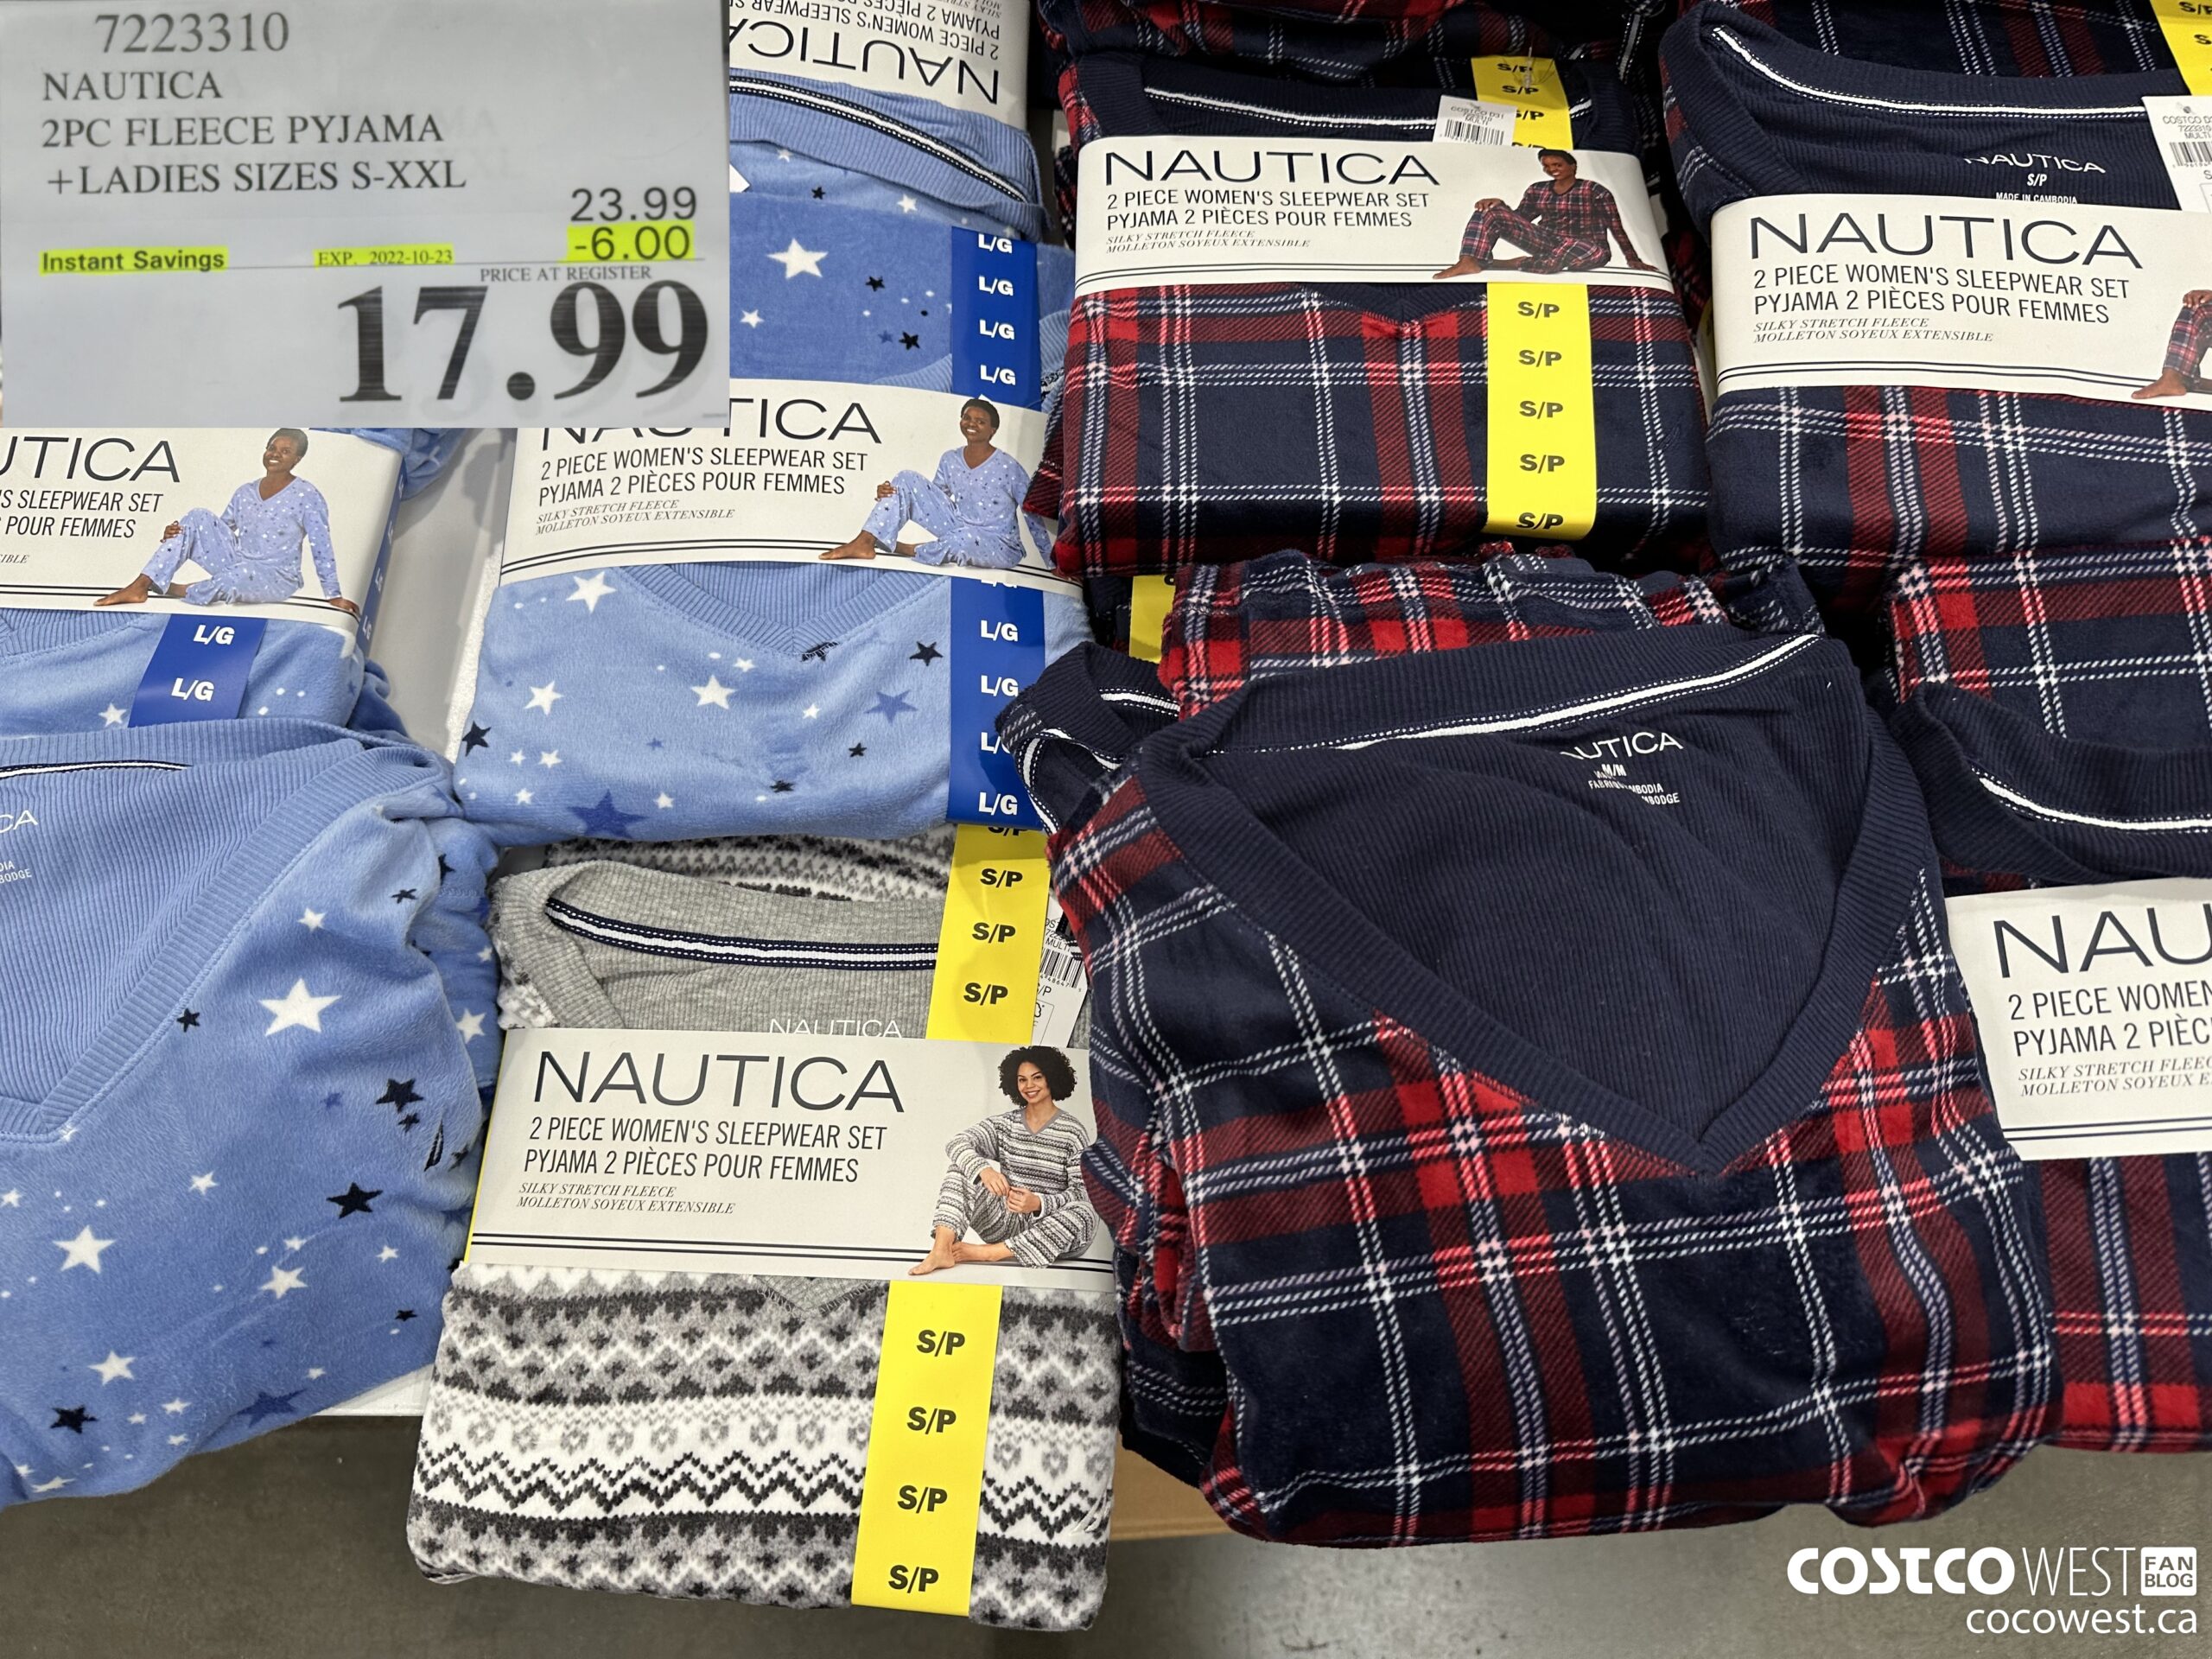 ler supplere perspektiv Costco Fall 2022 Superpost – The Entire Clothing Section! - Costco West Fan  Blog